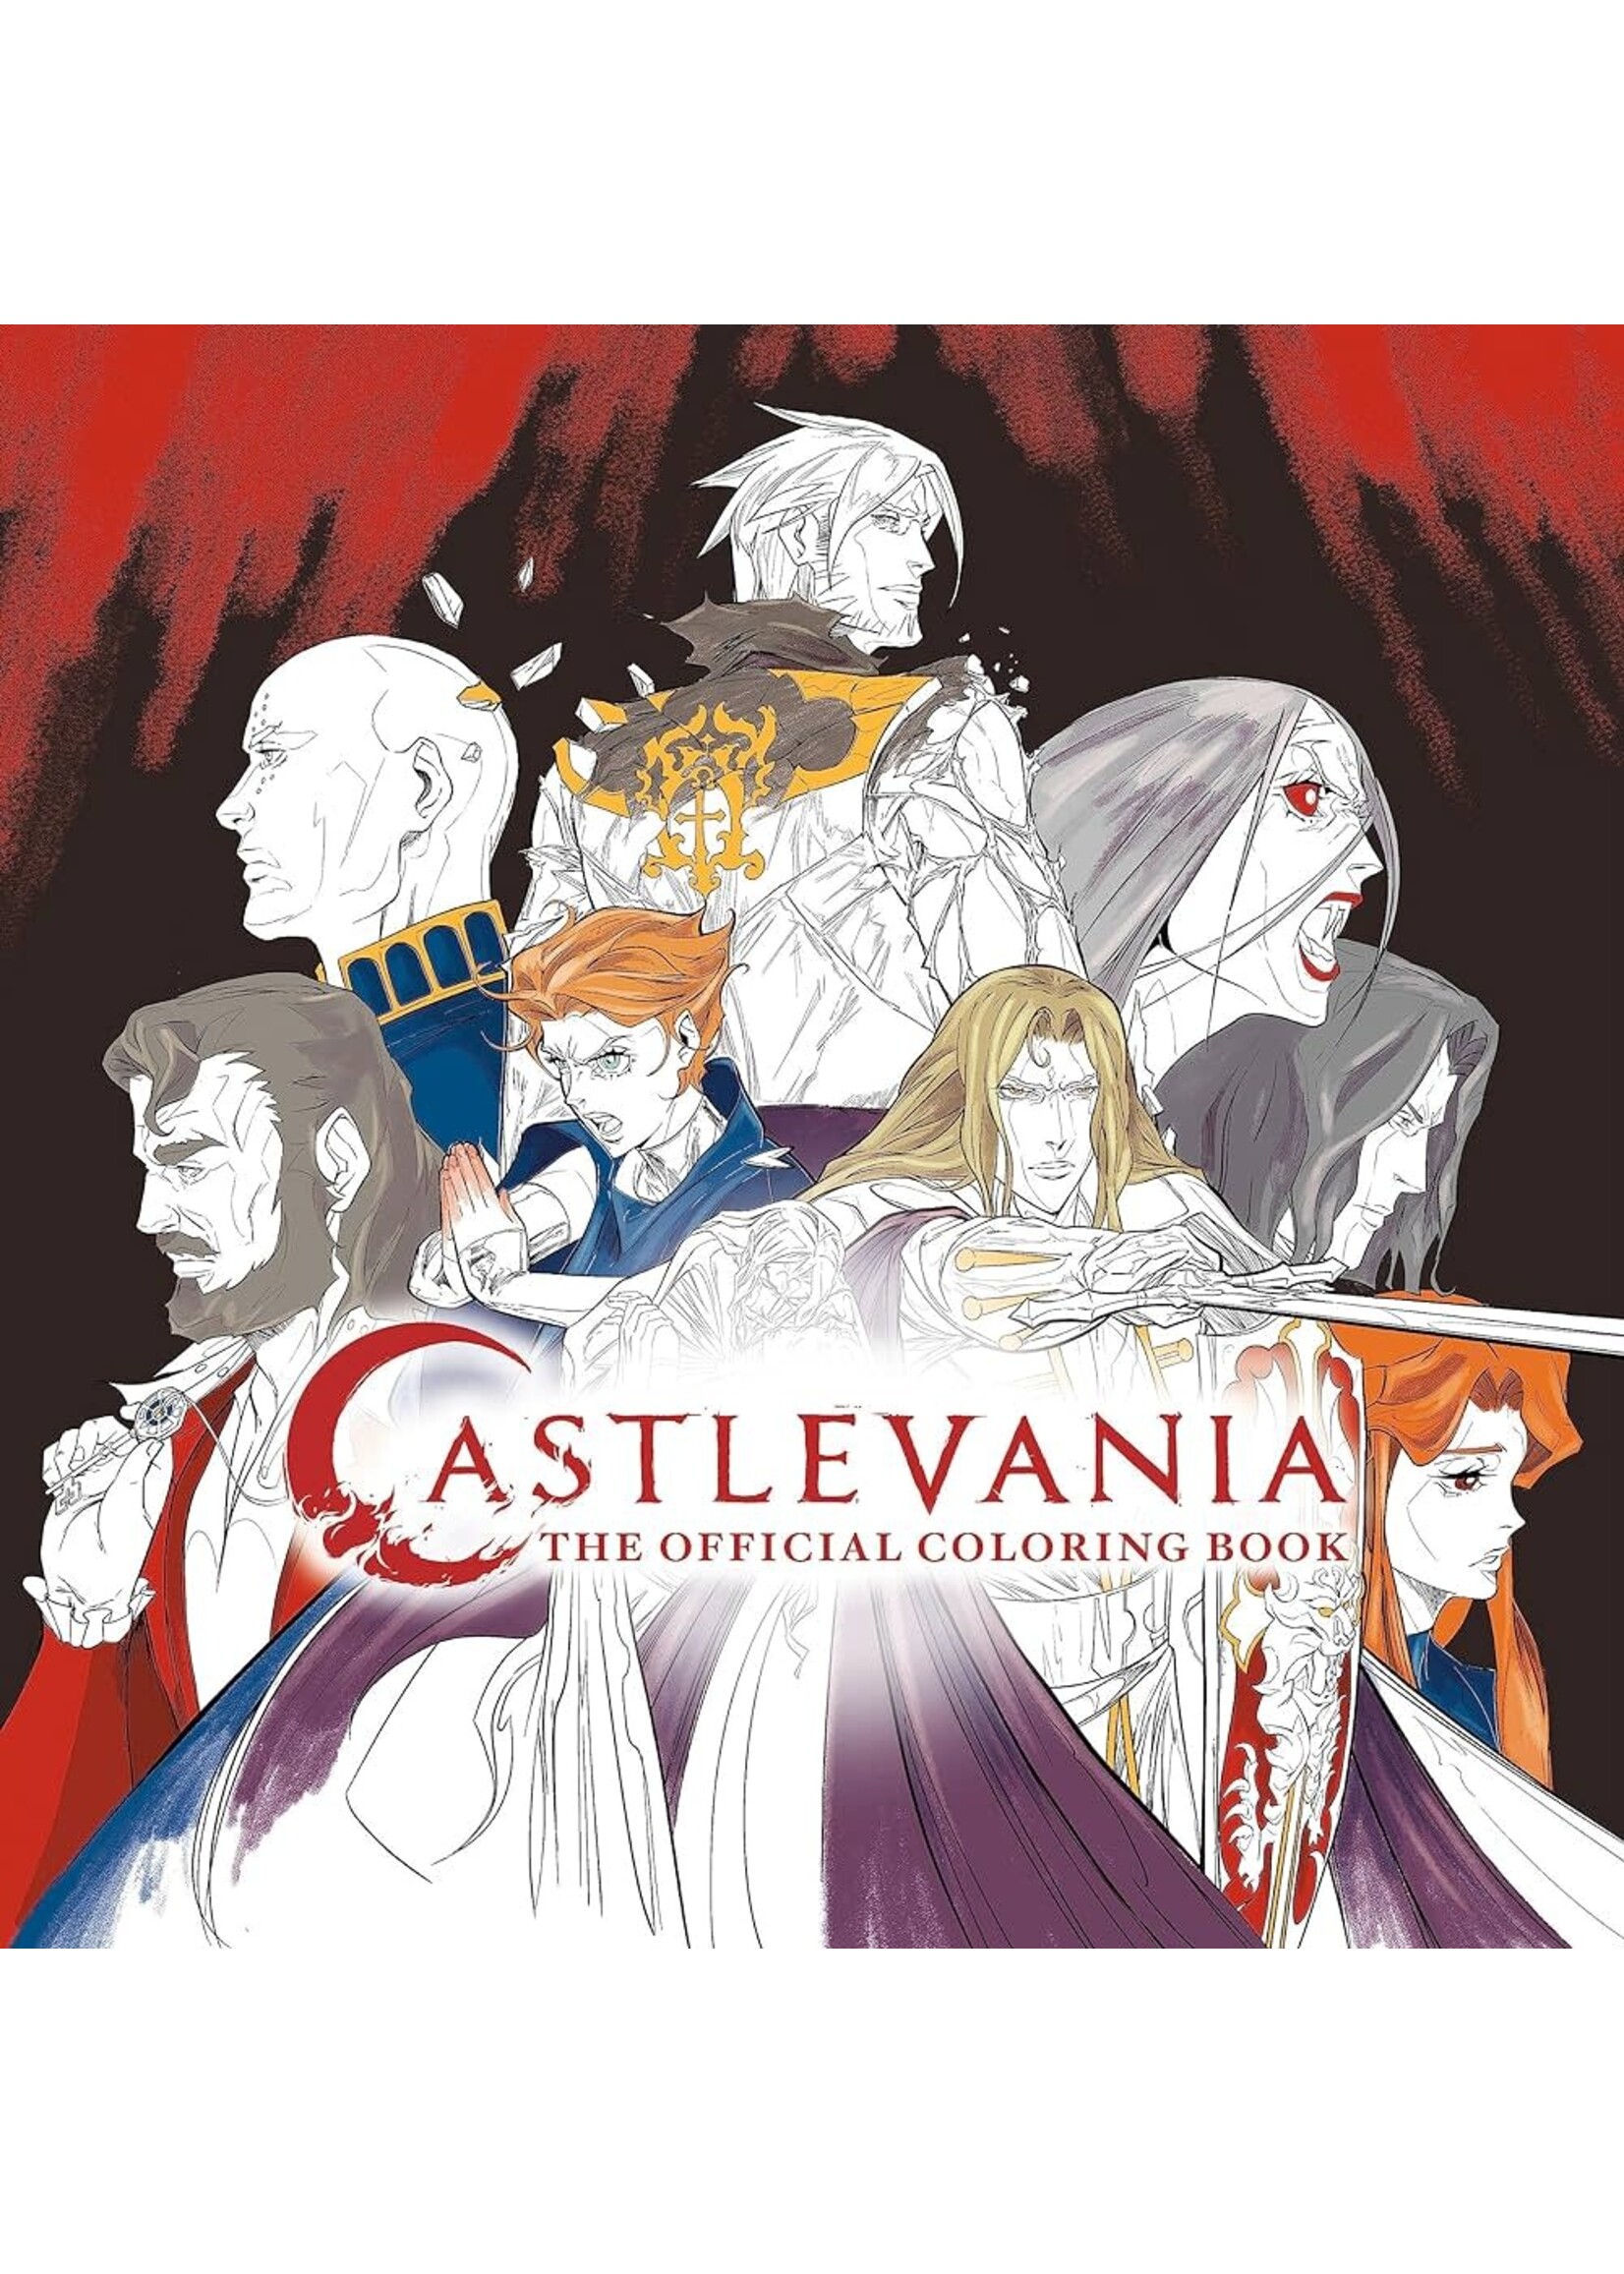 RANDOM HOUSE WORLDS CASTLEVANIA OFFICIAL COLORING BOOK